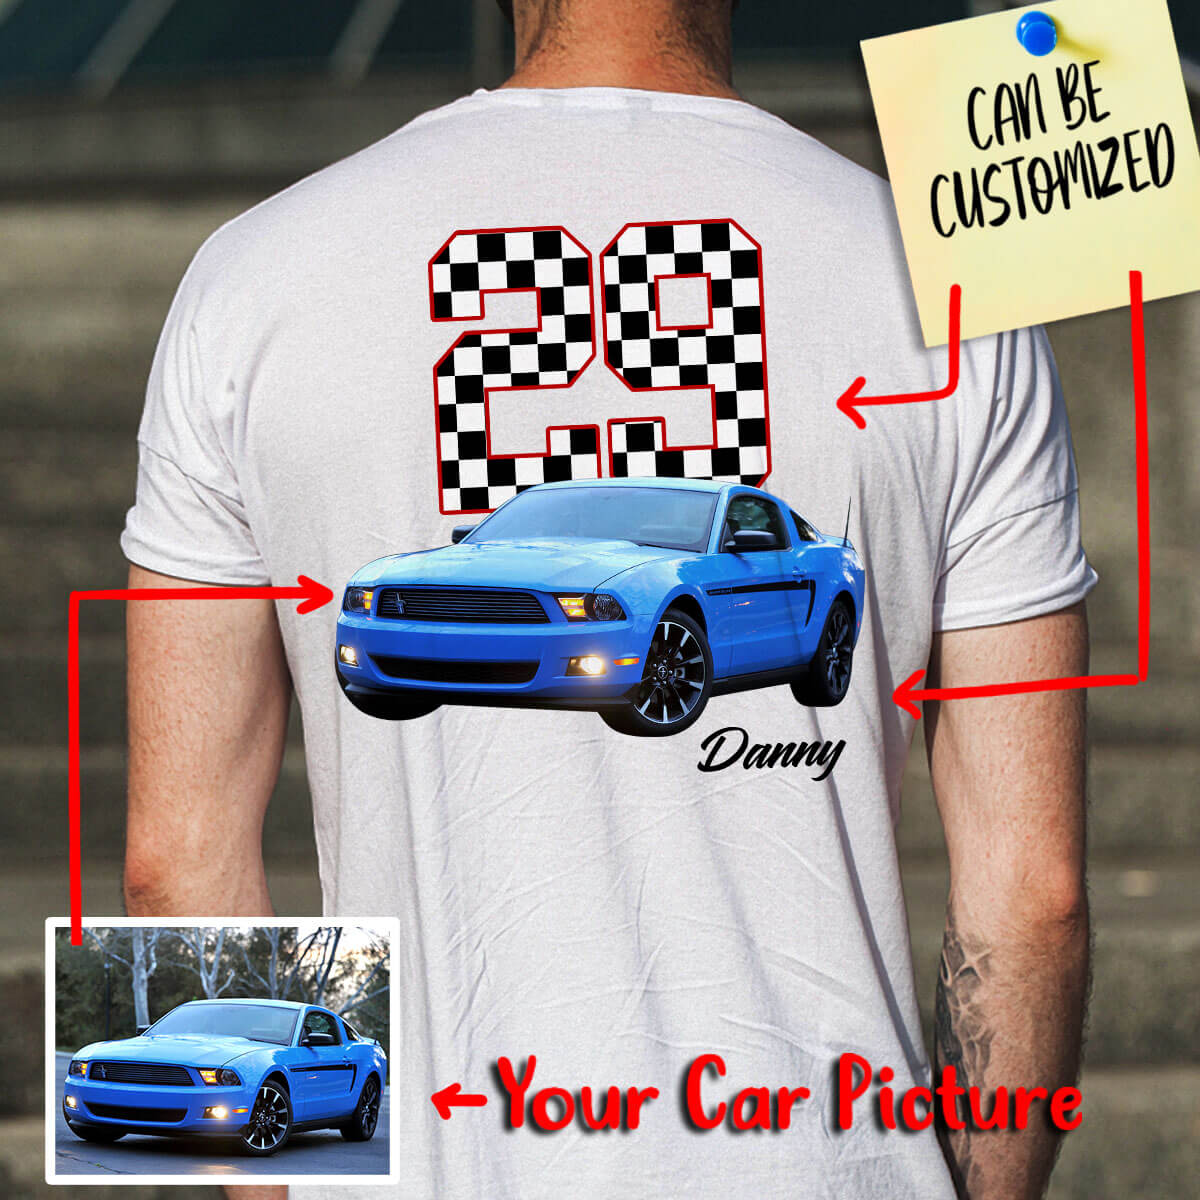 Customized Mustang Art T-shirt And Art Mustang Fa Collection StreetKars - Graphic 